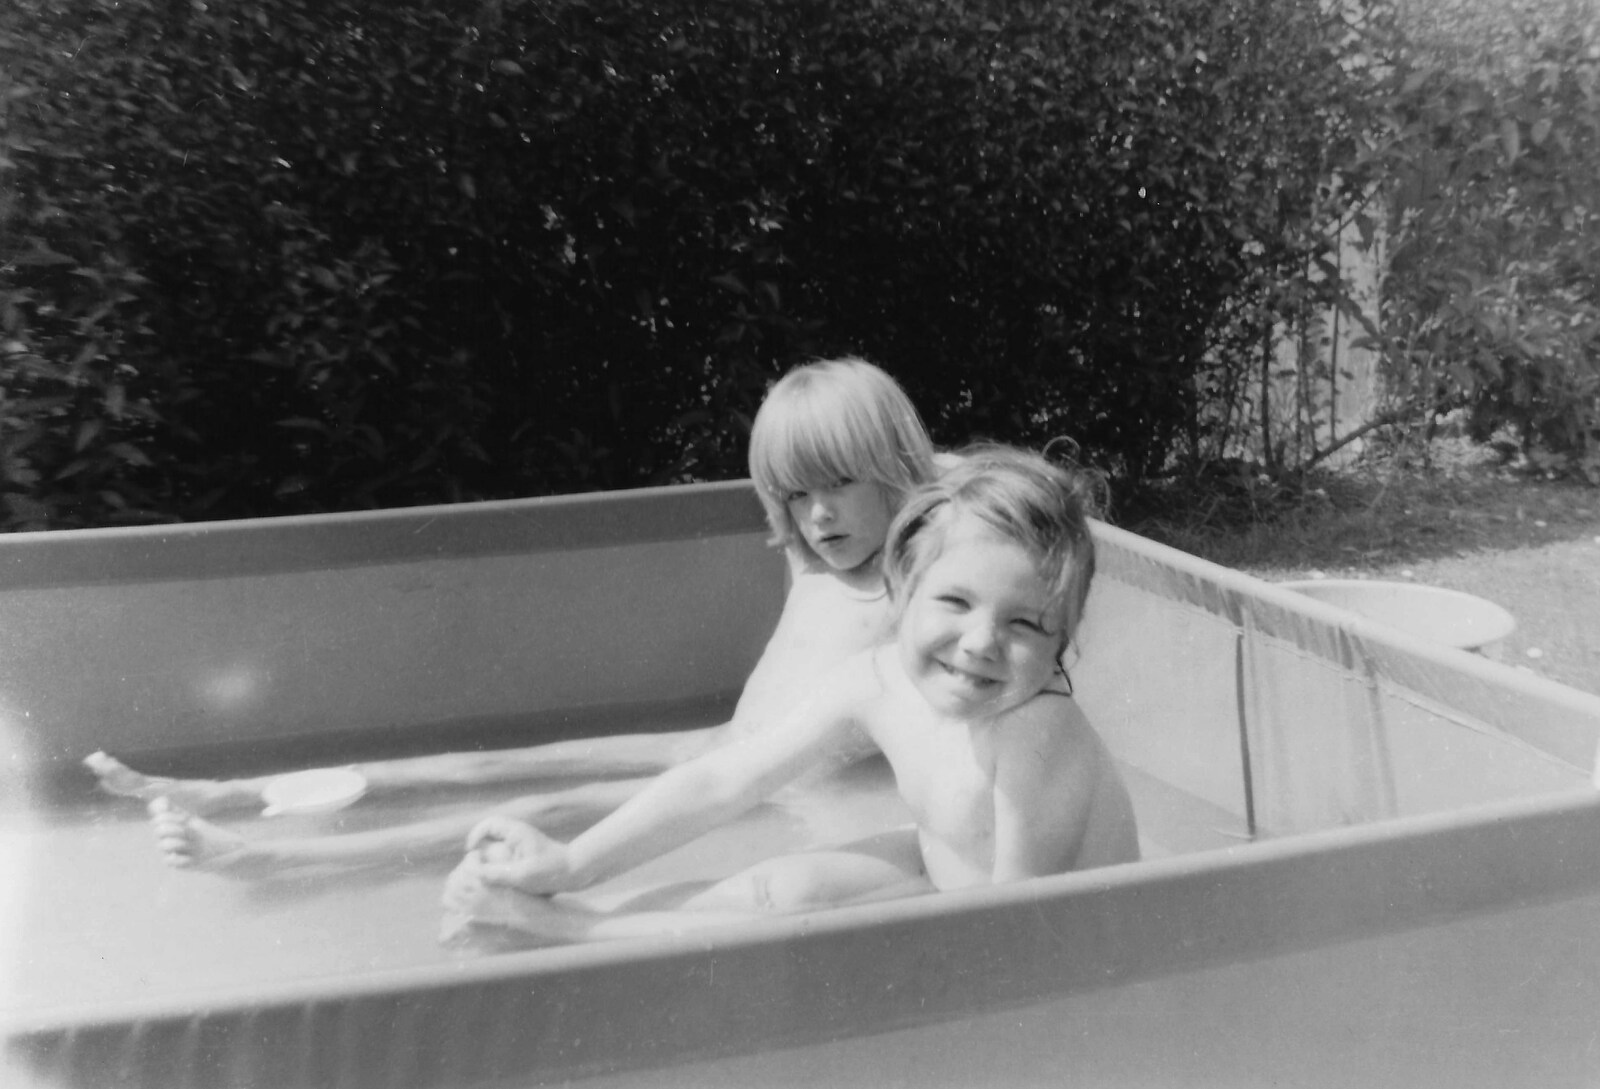 In the paddling pool, Raven Road from Family History: Raven Road, Timperley, Altrincham - 24th January 2020